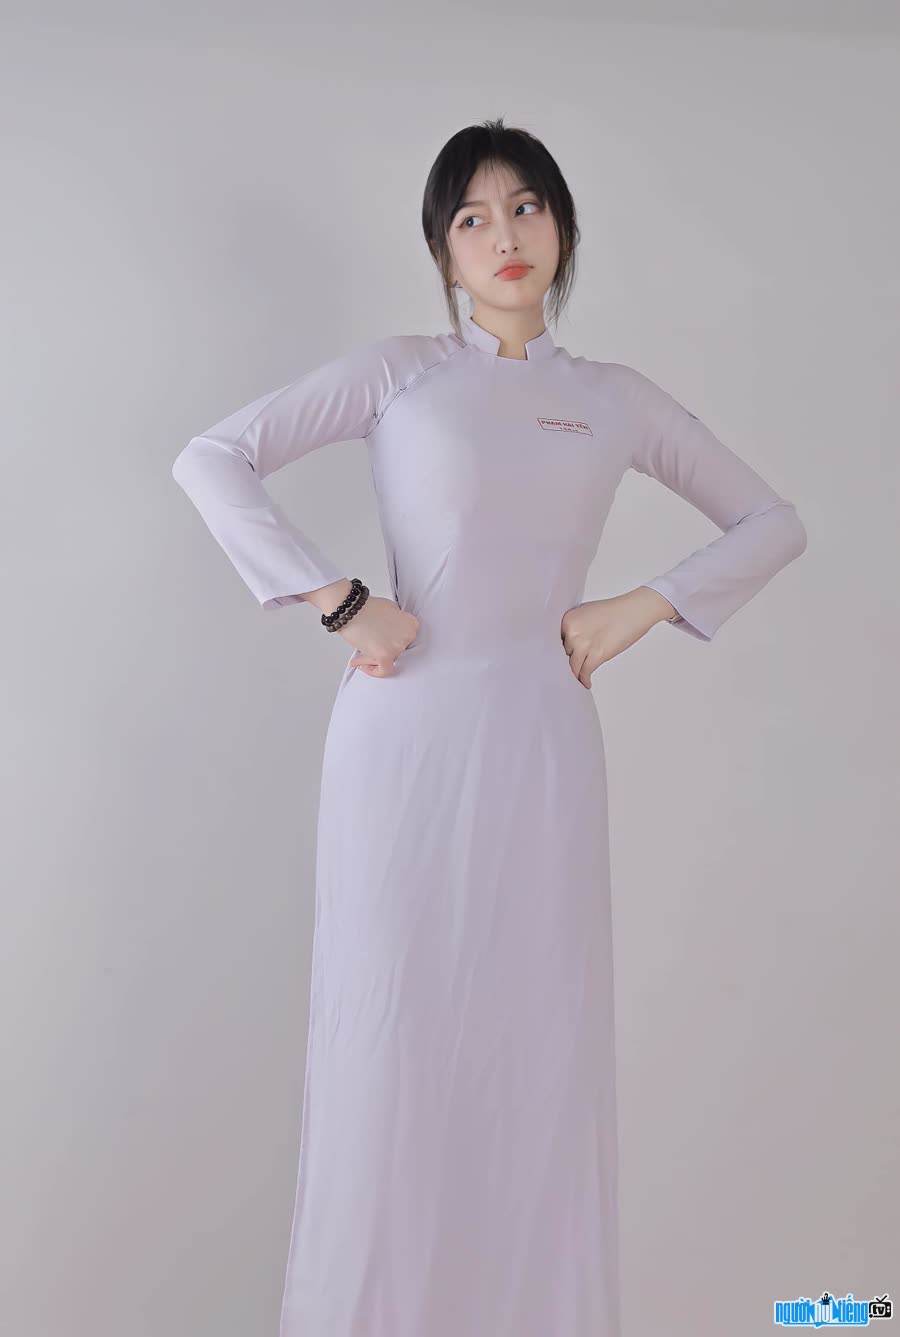 Lovely charming girl in a student ao dai